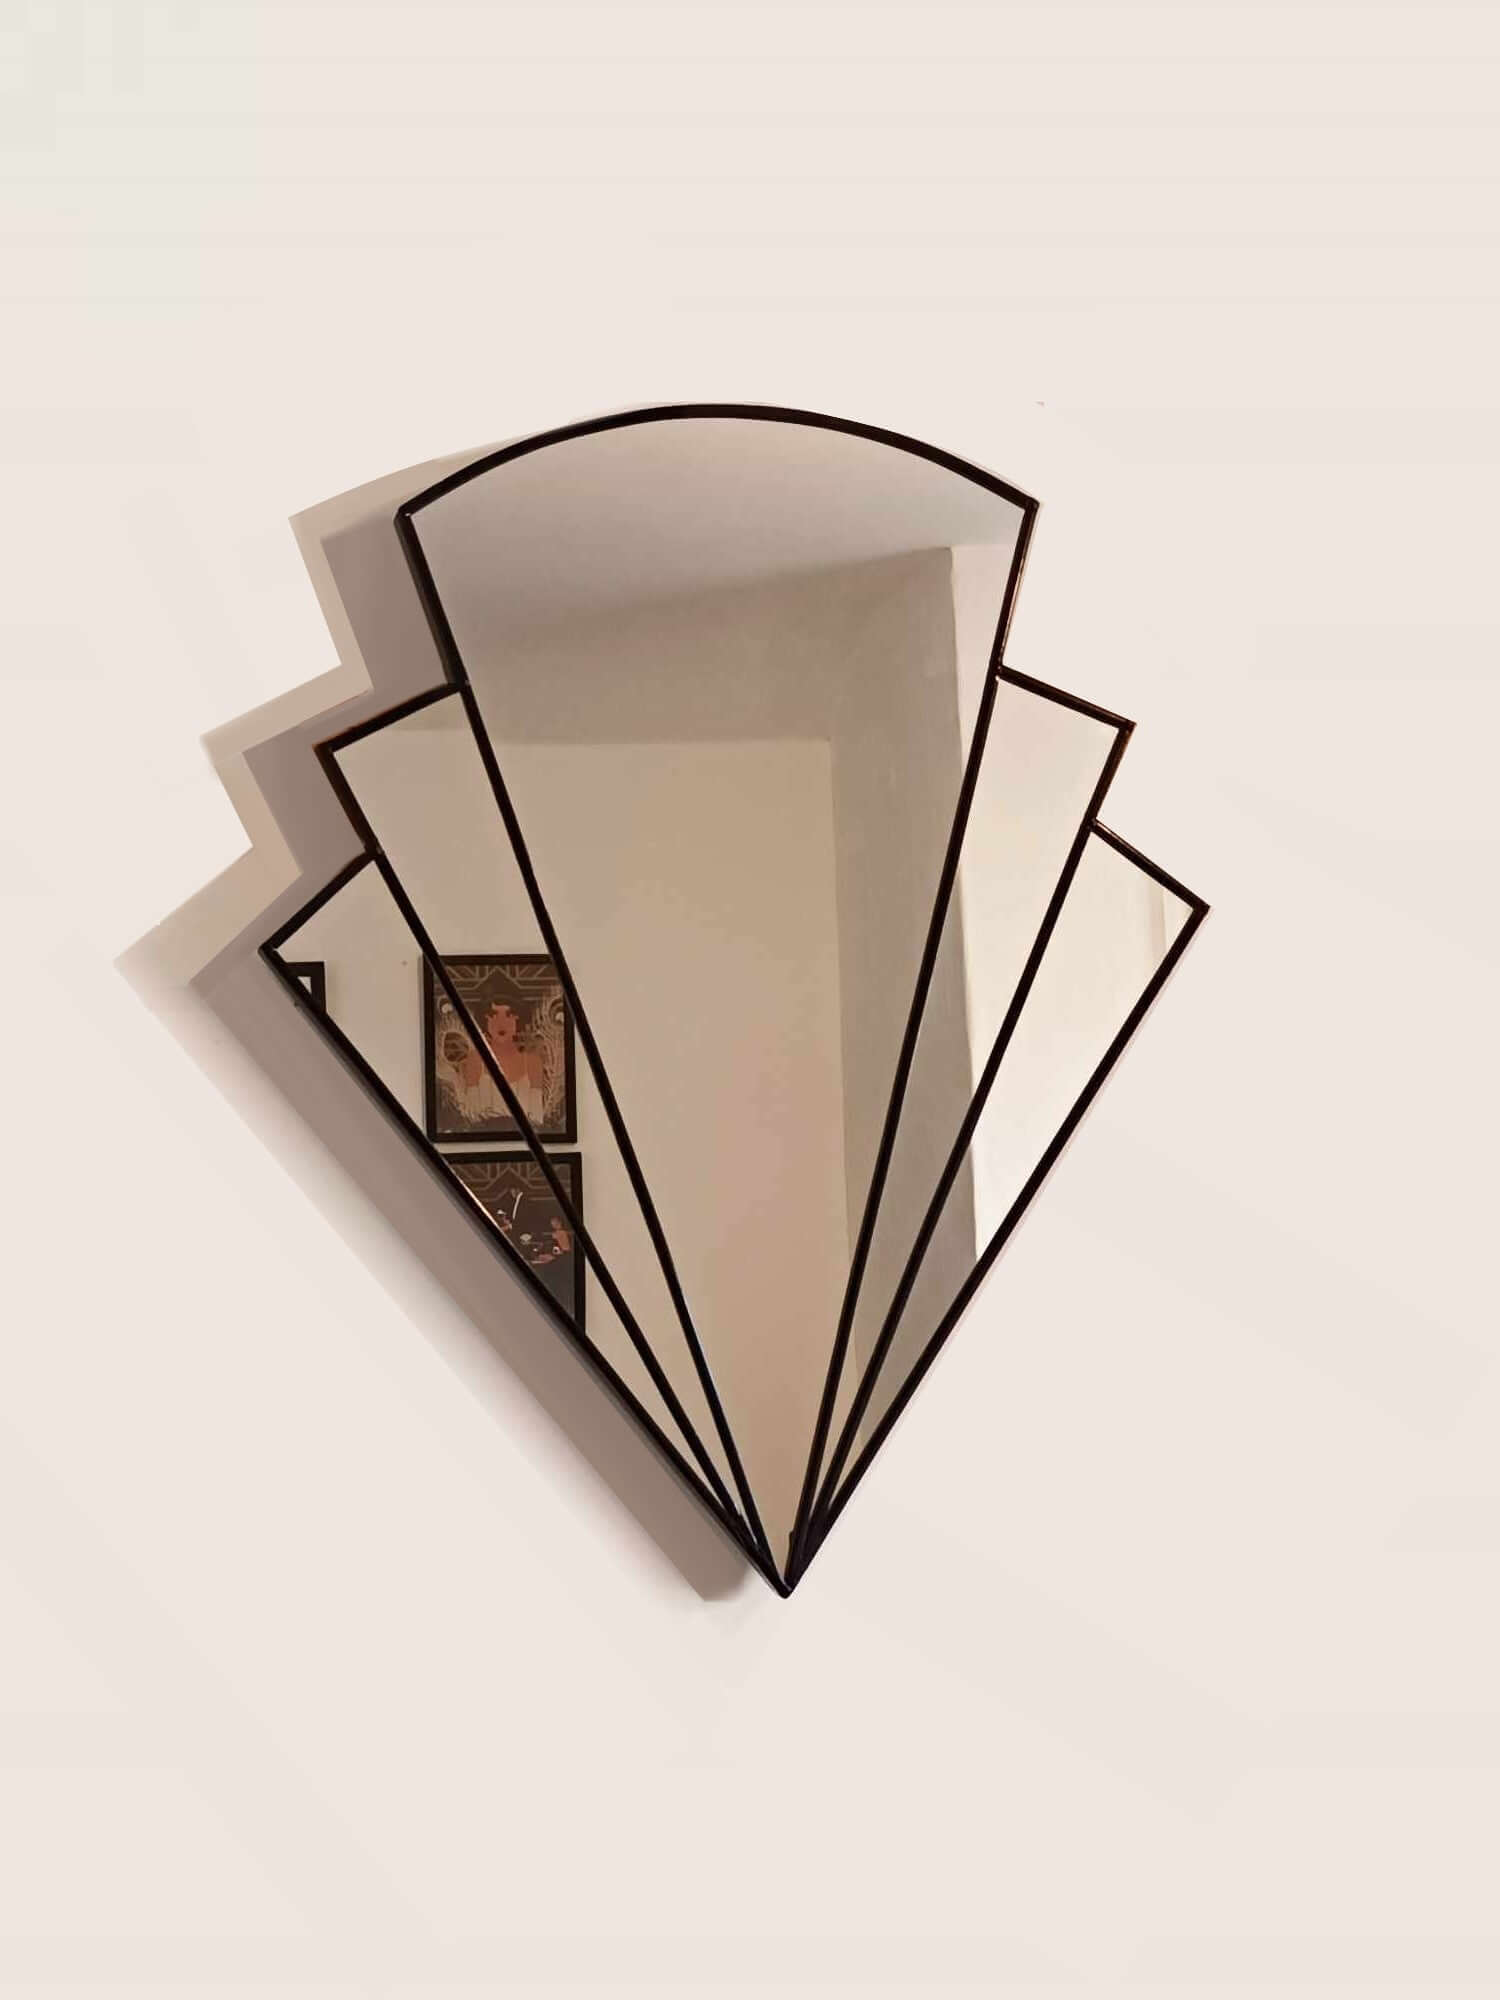 art deco wall mirror made in the UK